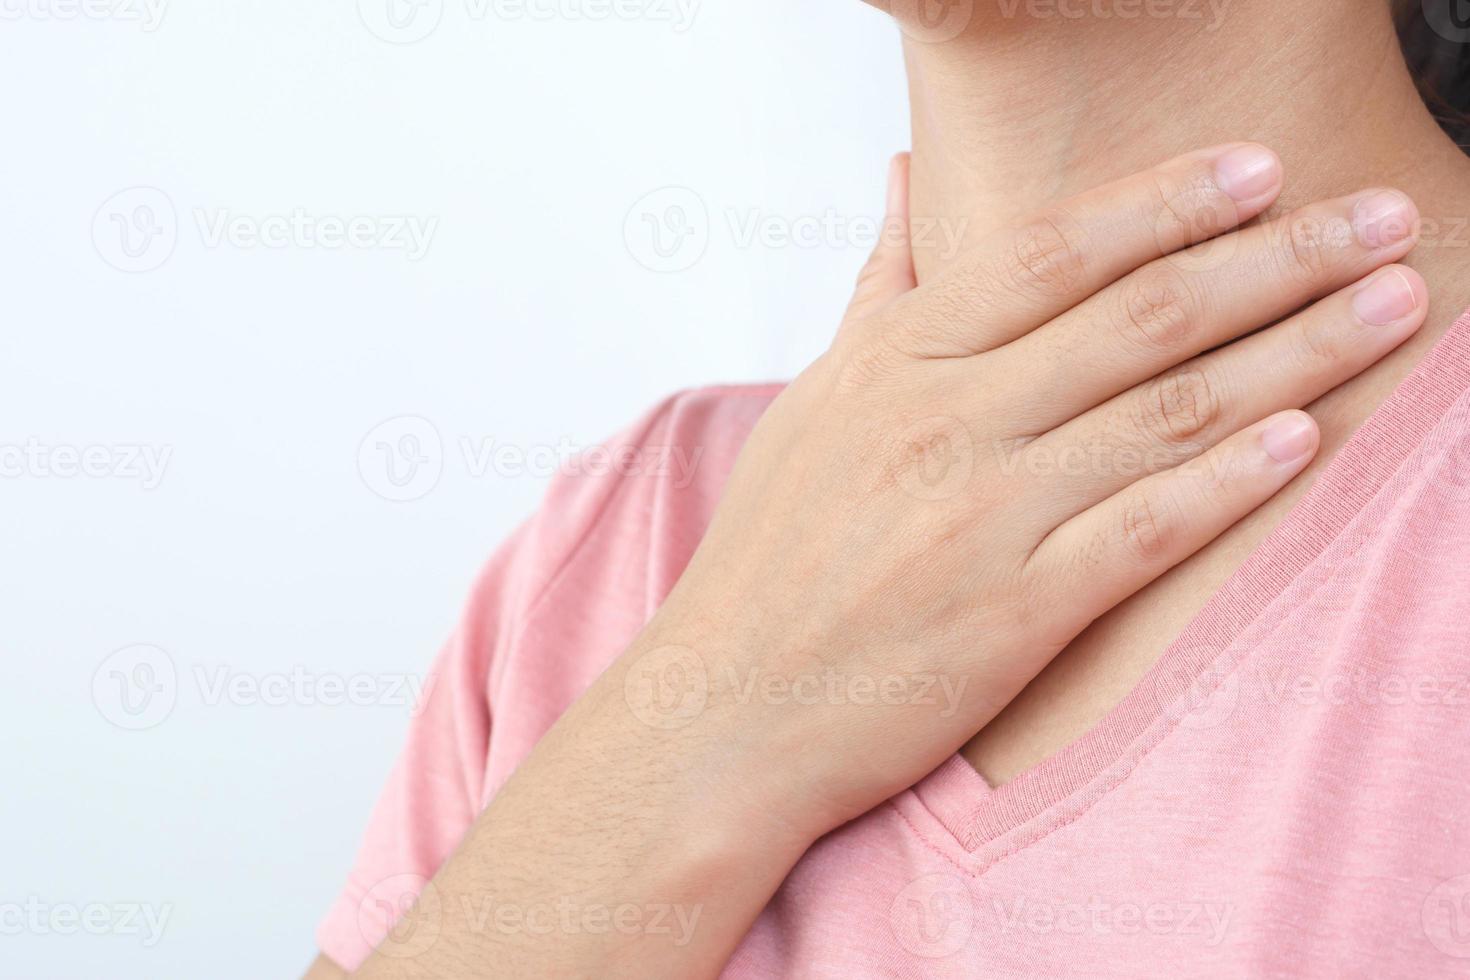 sore throat pain. Closeup of young woman sick holding her inflamed throat using hands to touch the ill neck in blue shirt on gray background. Medical and healthcare concept. Focus red on to show pain. photo